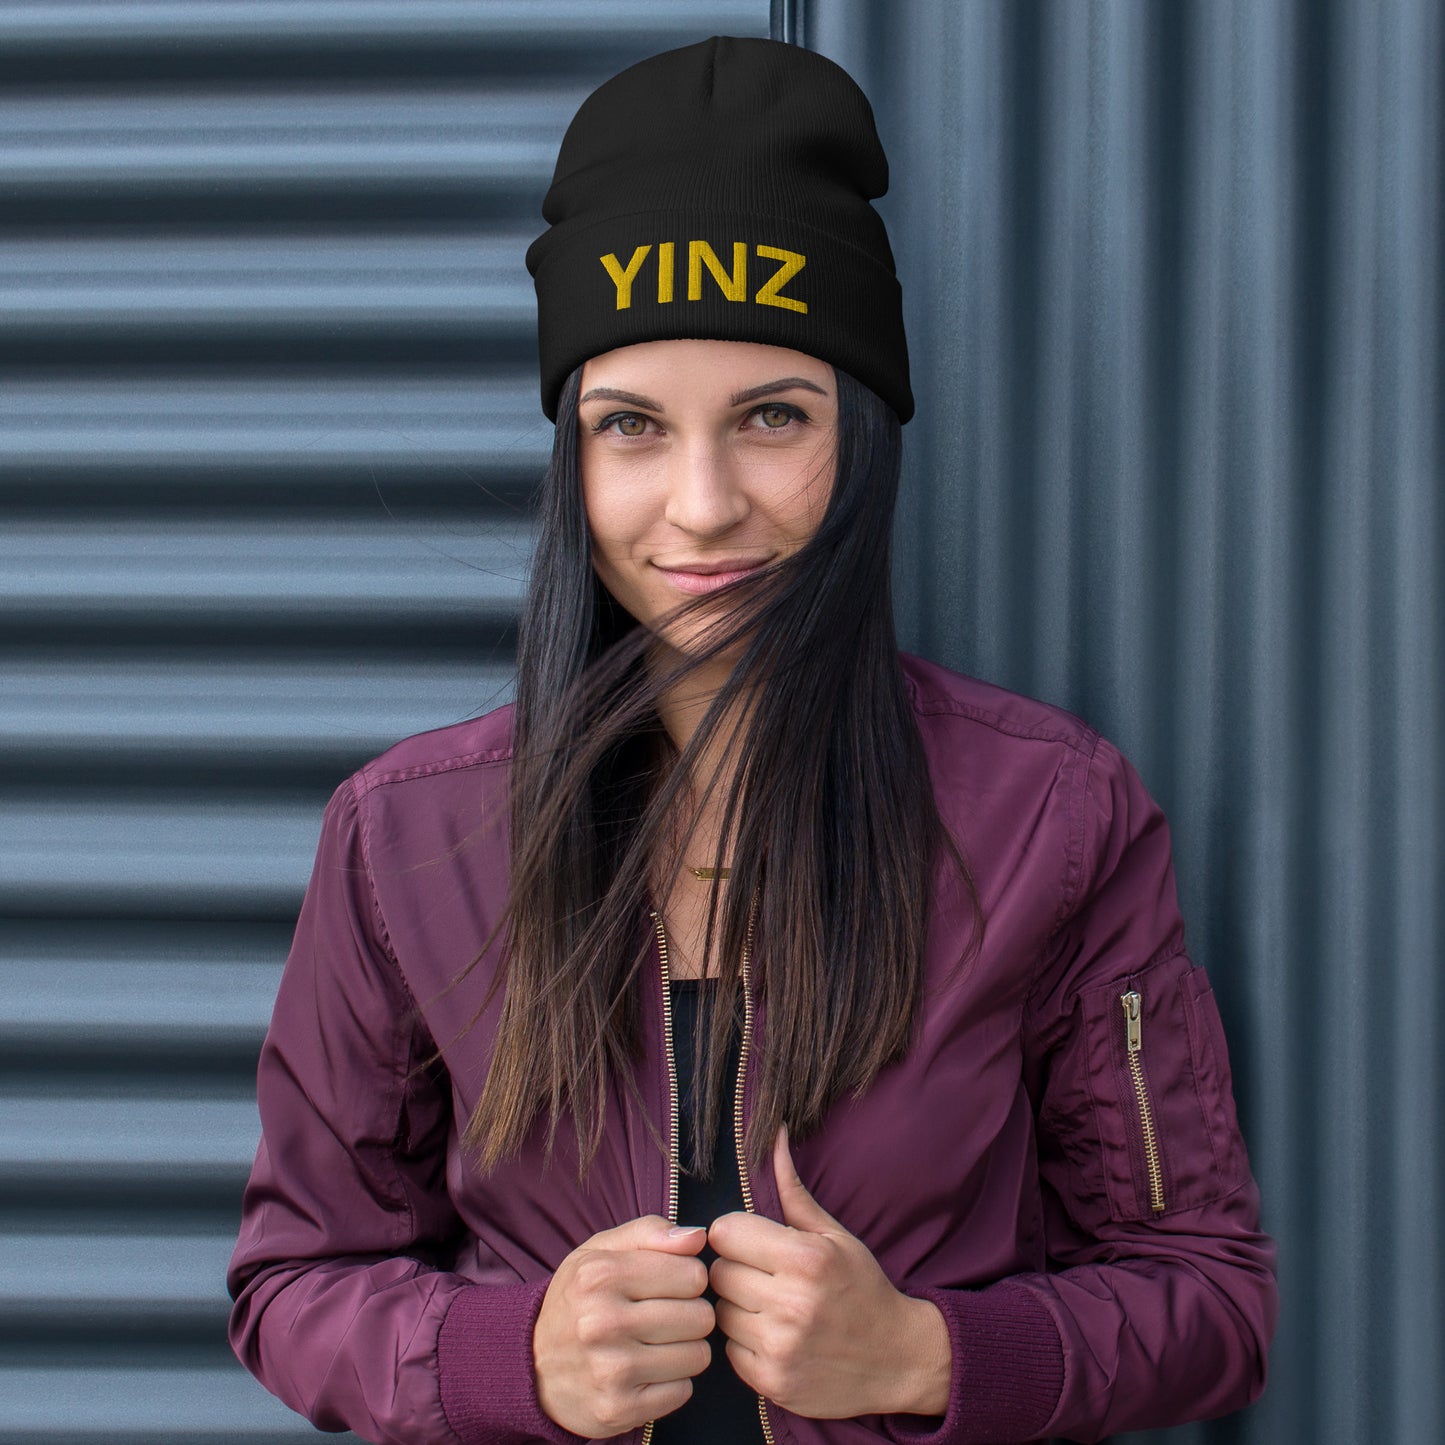 YINZ - Embroidered Beanie